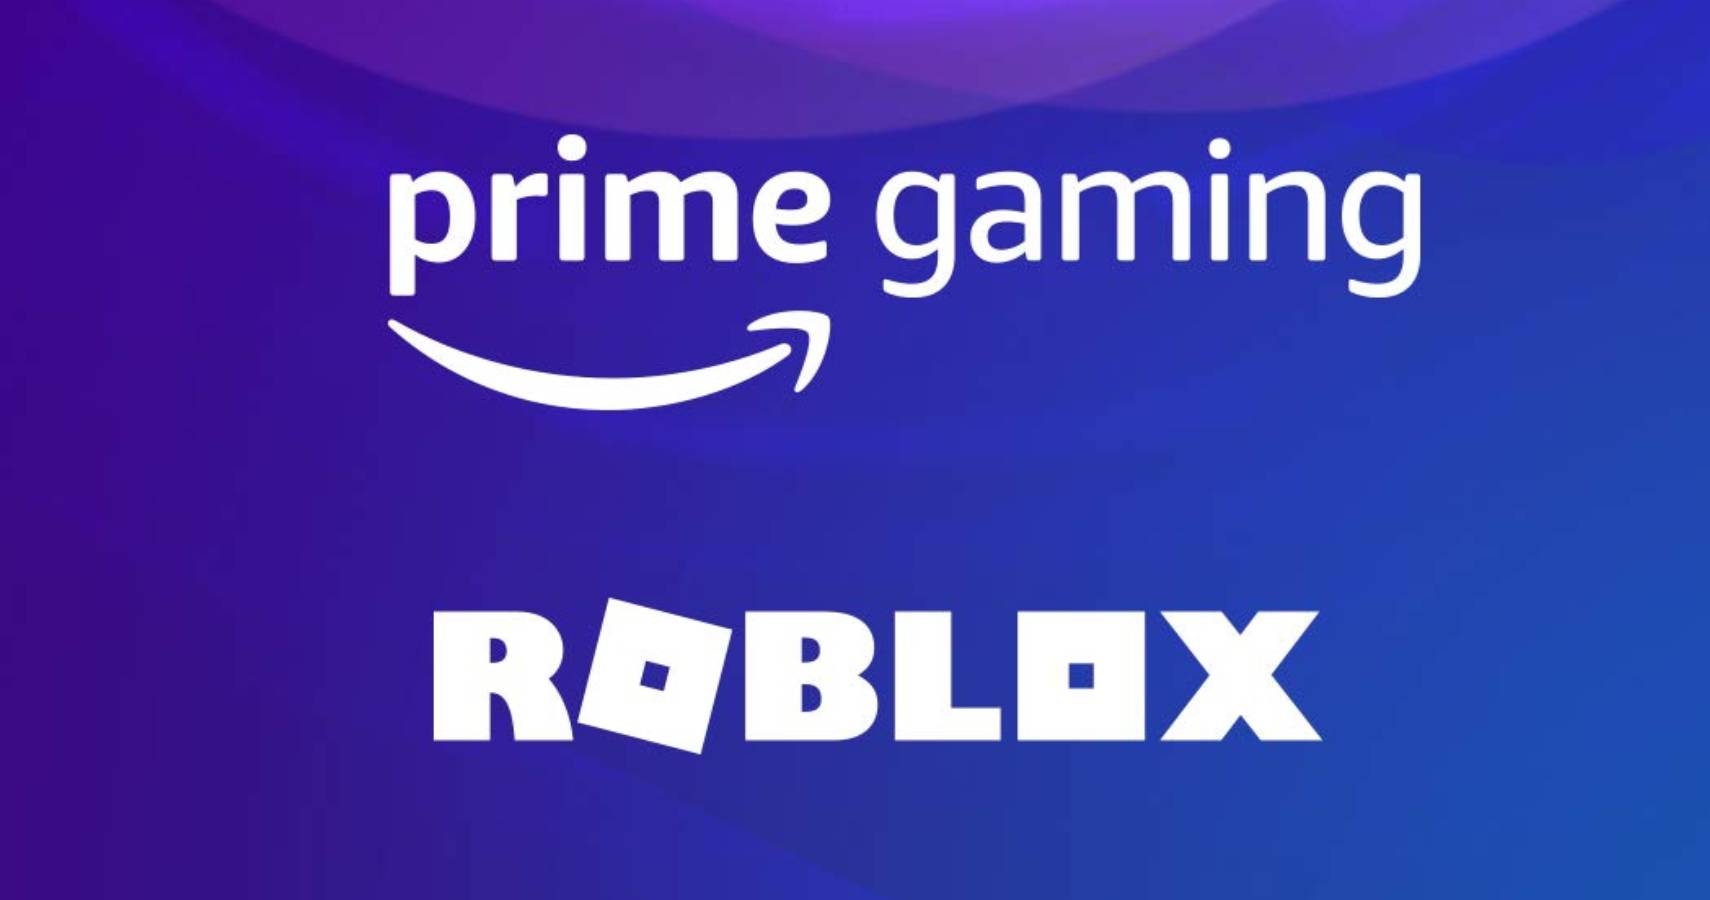 Prime Gaming S First New Benefit Is Exclusive Roblox Content - roblox prime gaming codes